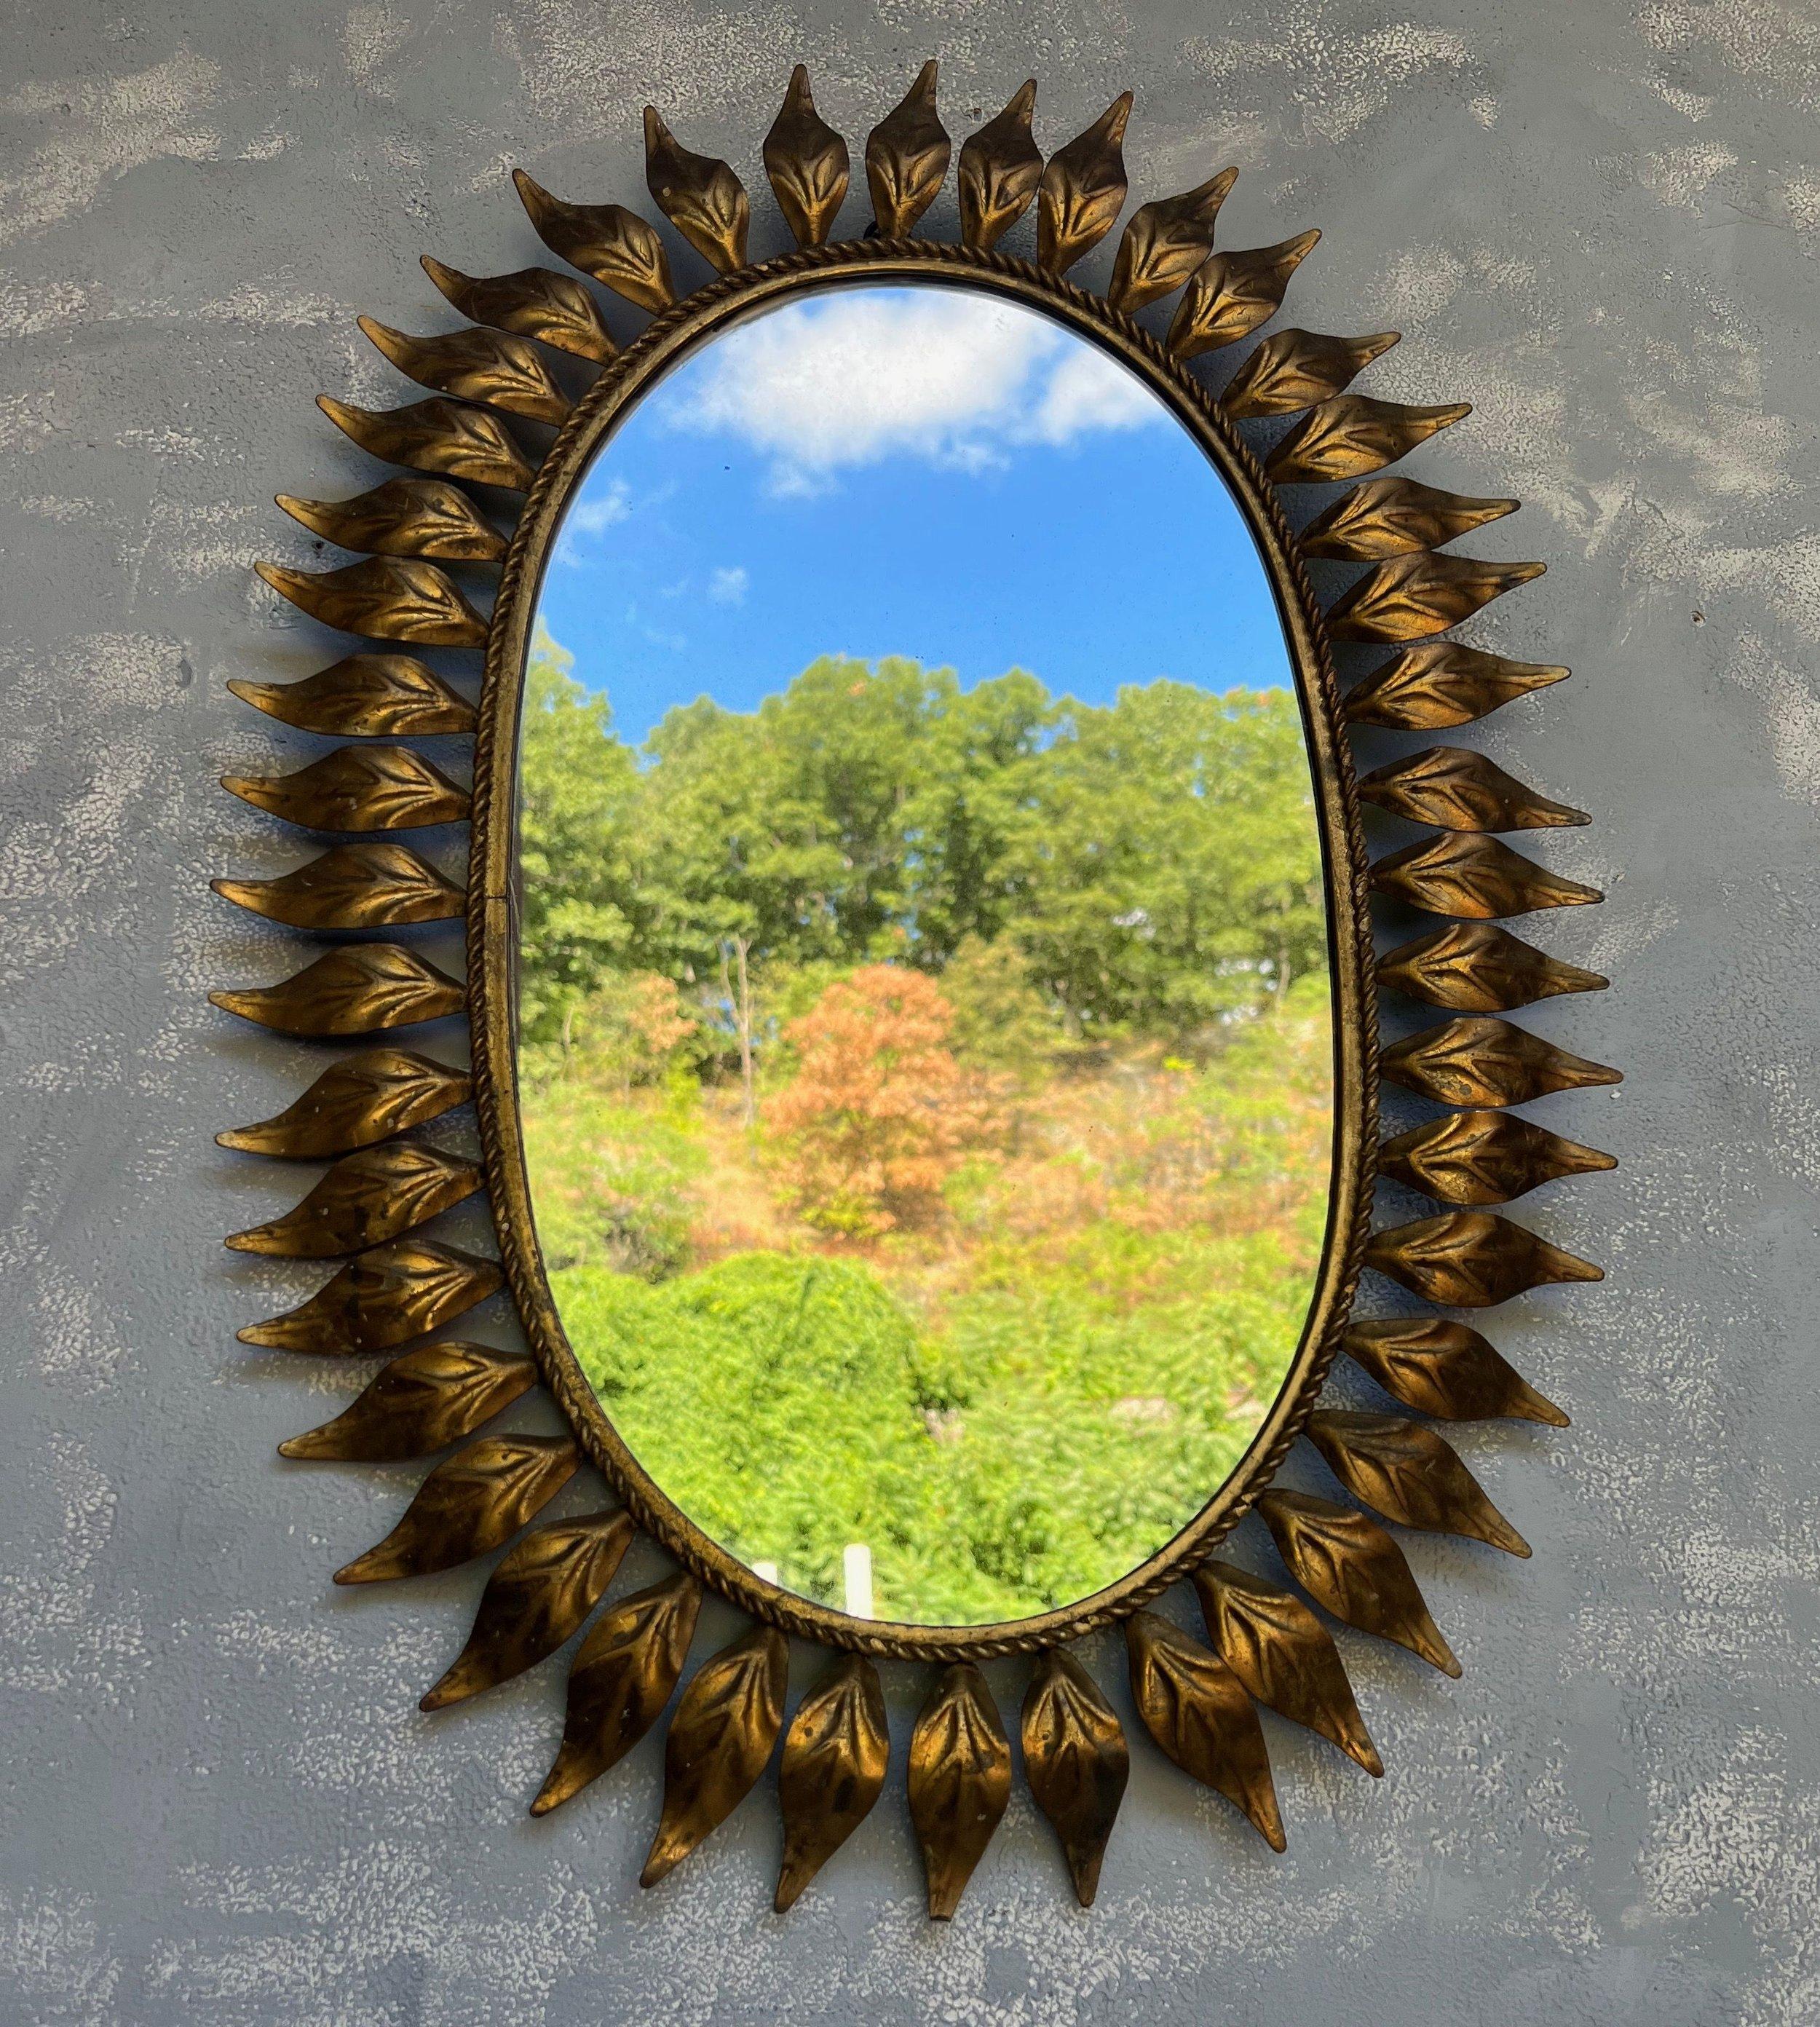 This lovely mid century oval gilt metal sunburst mirror features small pointed rays surrounding a braided interior frame. The metal has a richly gilt patina, original to the piece. We have added a felt backing to give the mirror more protection as